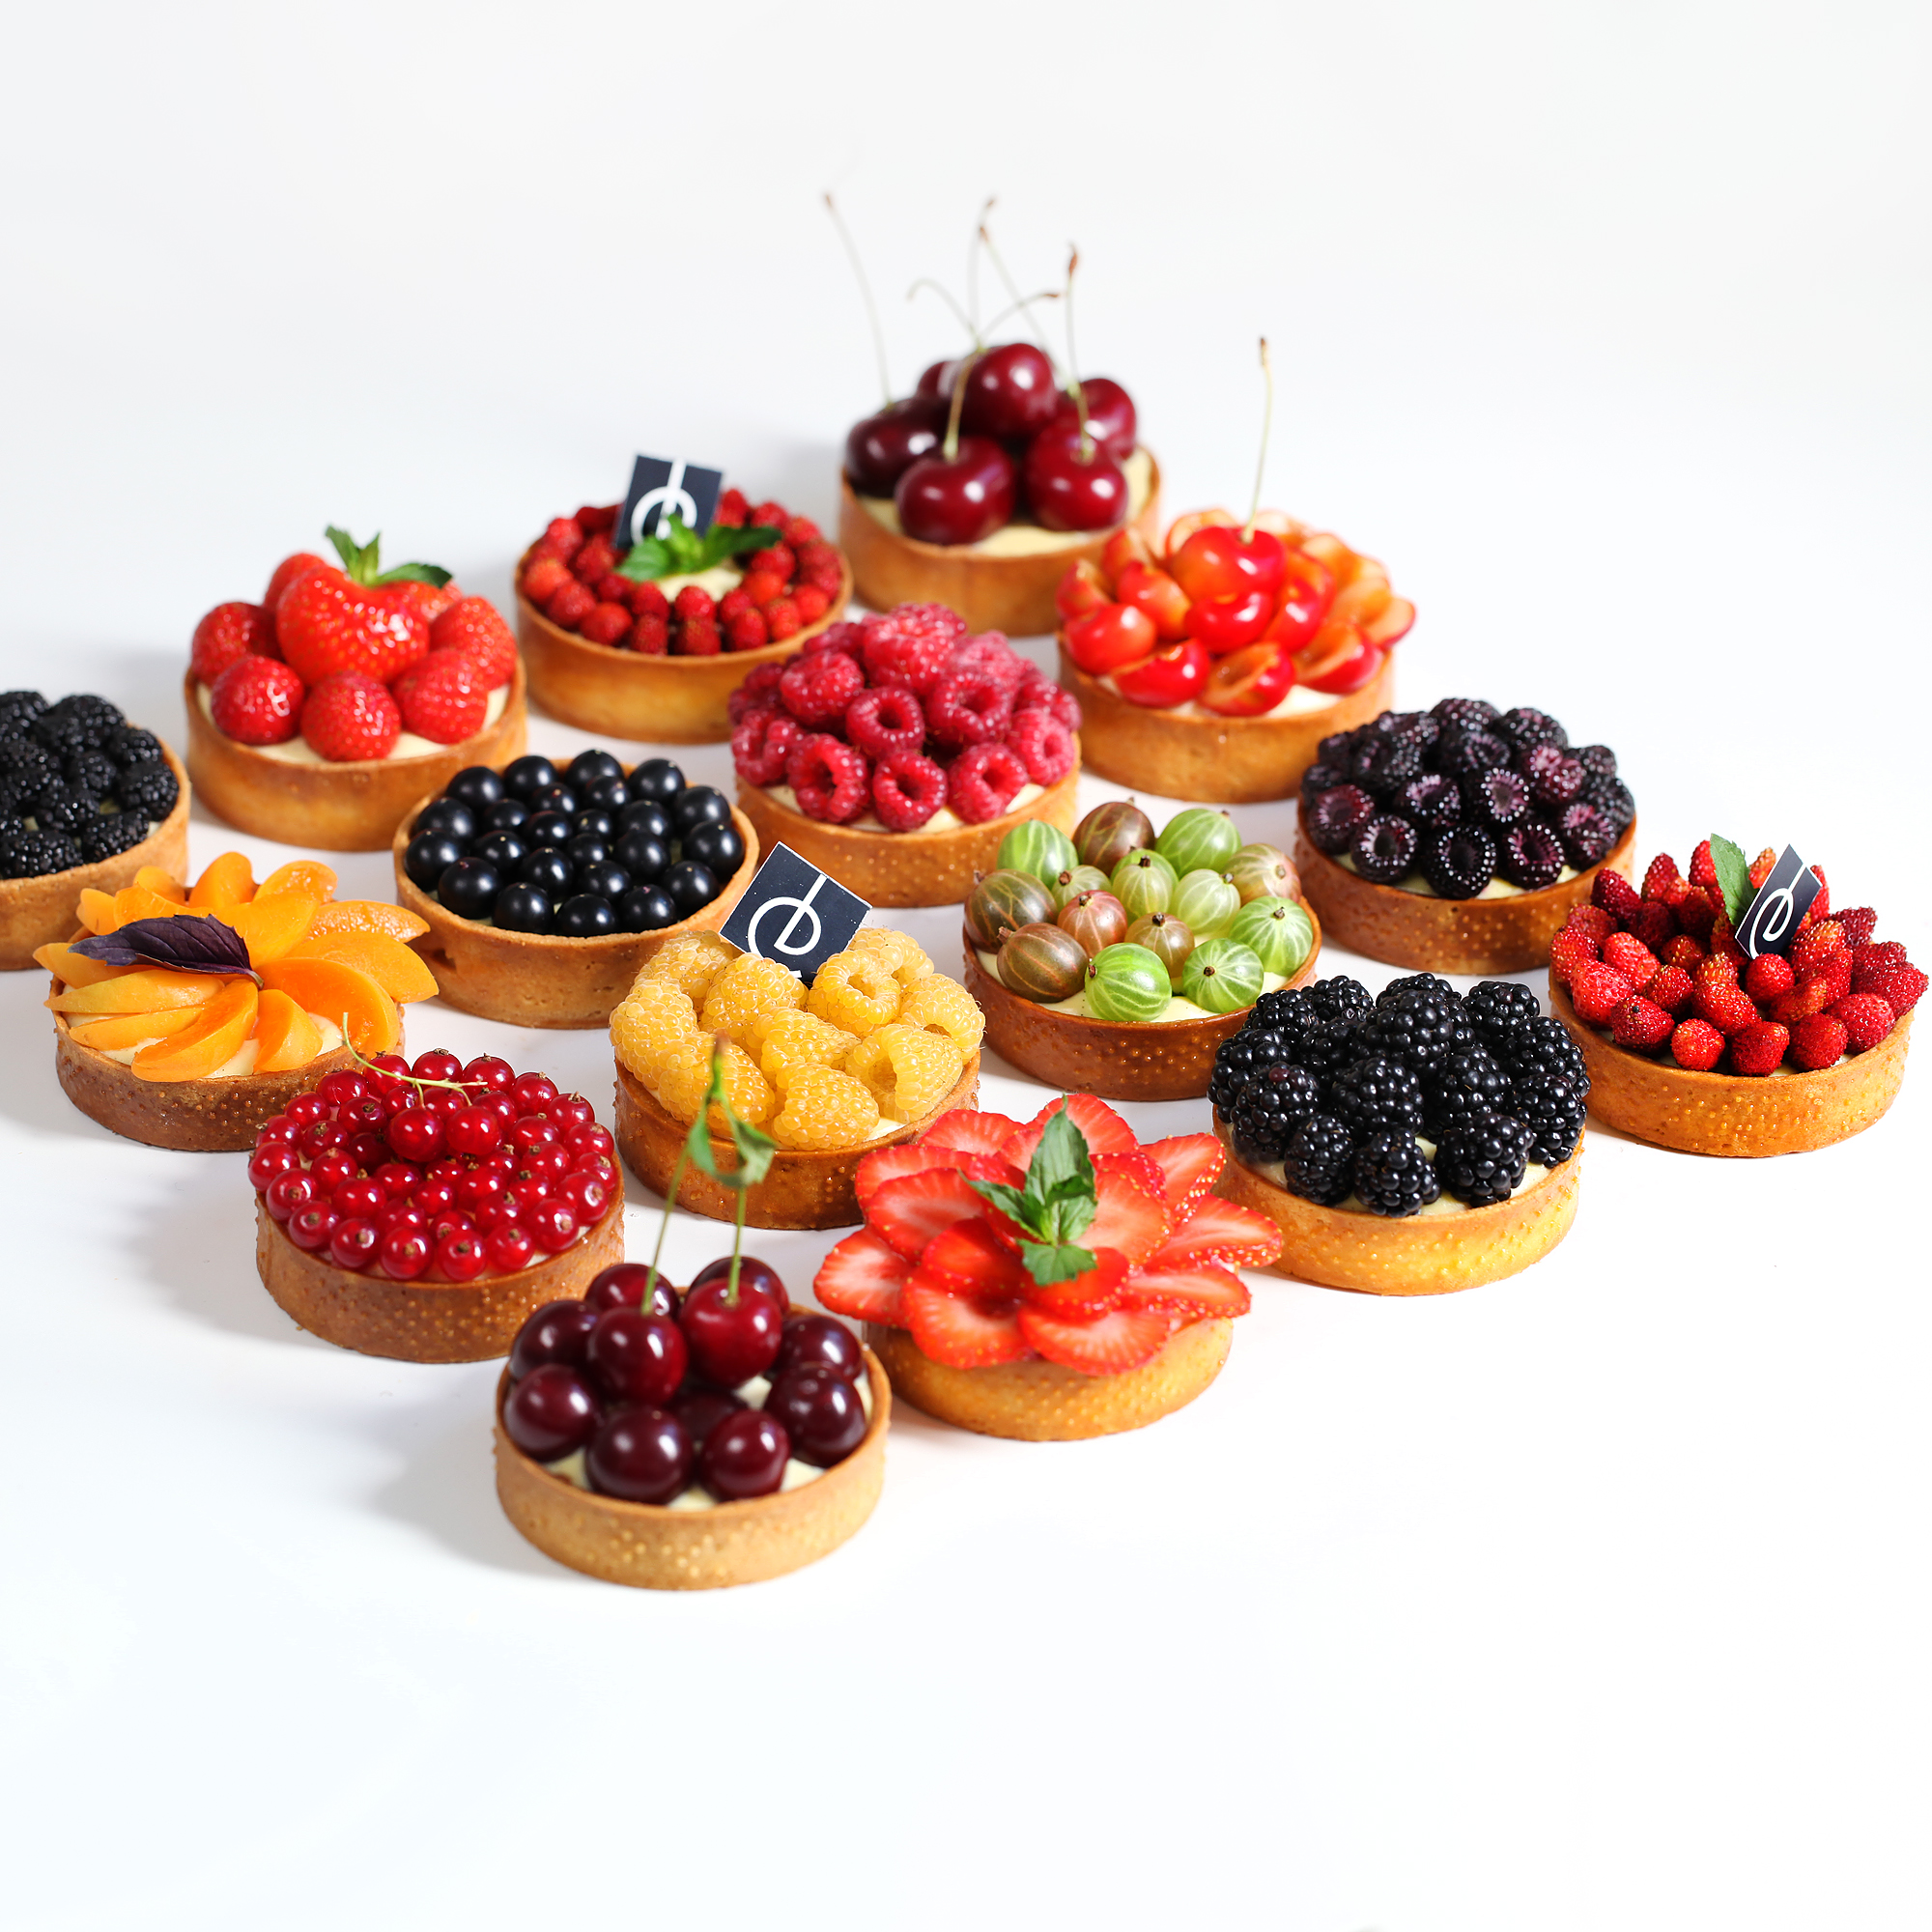 Tarts with berries